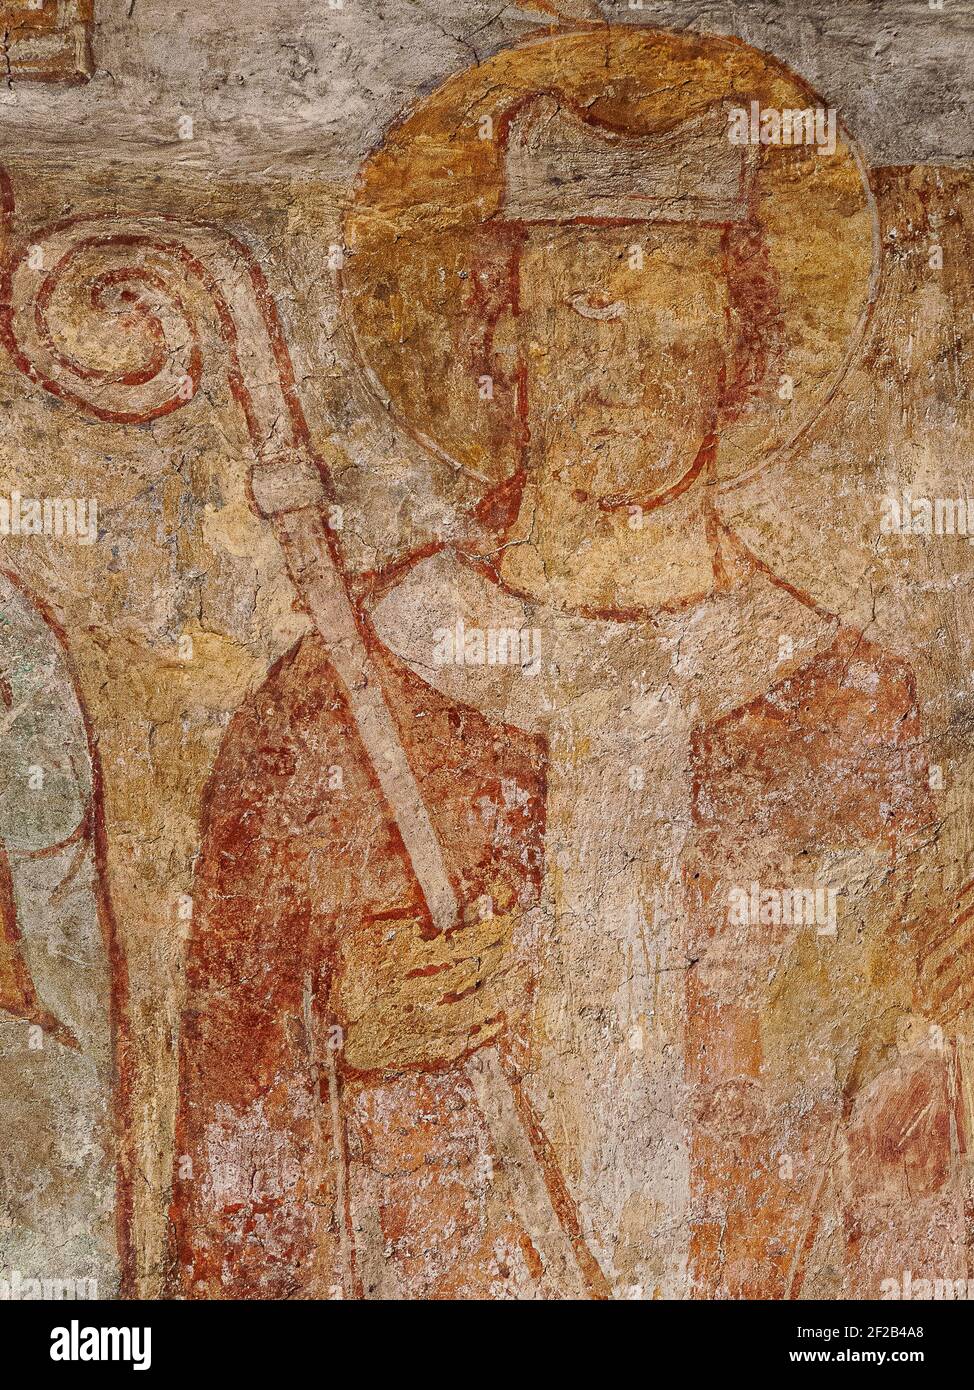 800 years old romanesque mural of an archbishop with crook and mitre, Övraby church, Sweden, November 6, 2009 Stock Photo